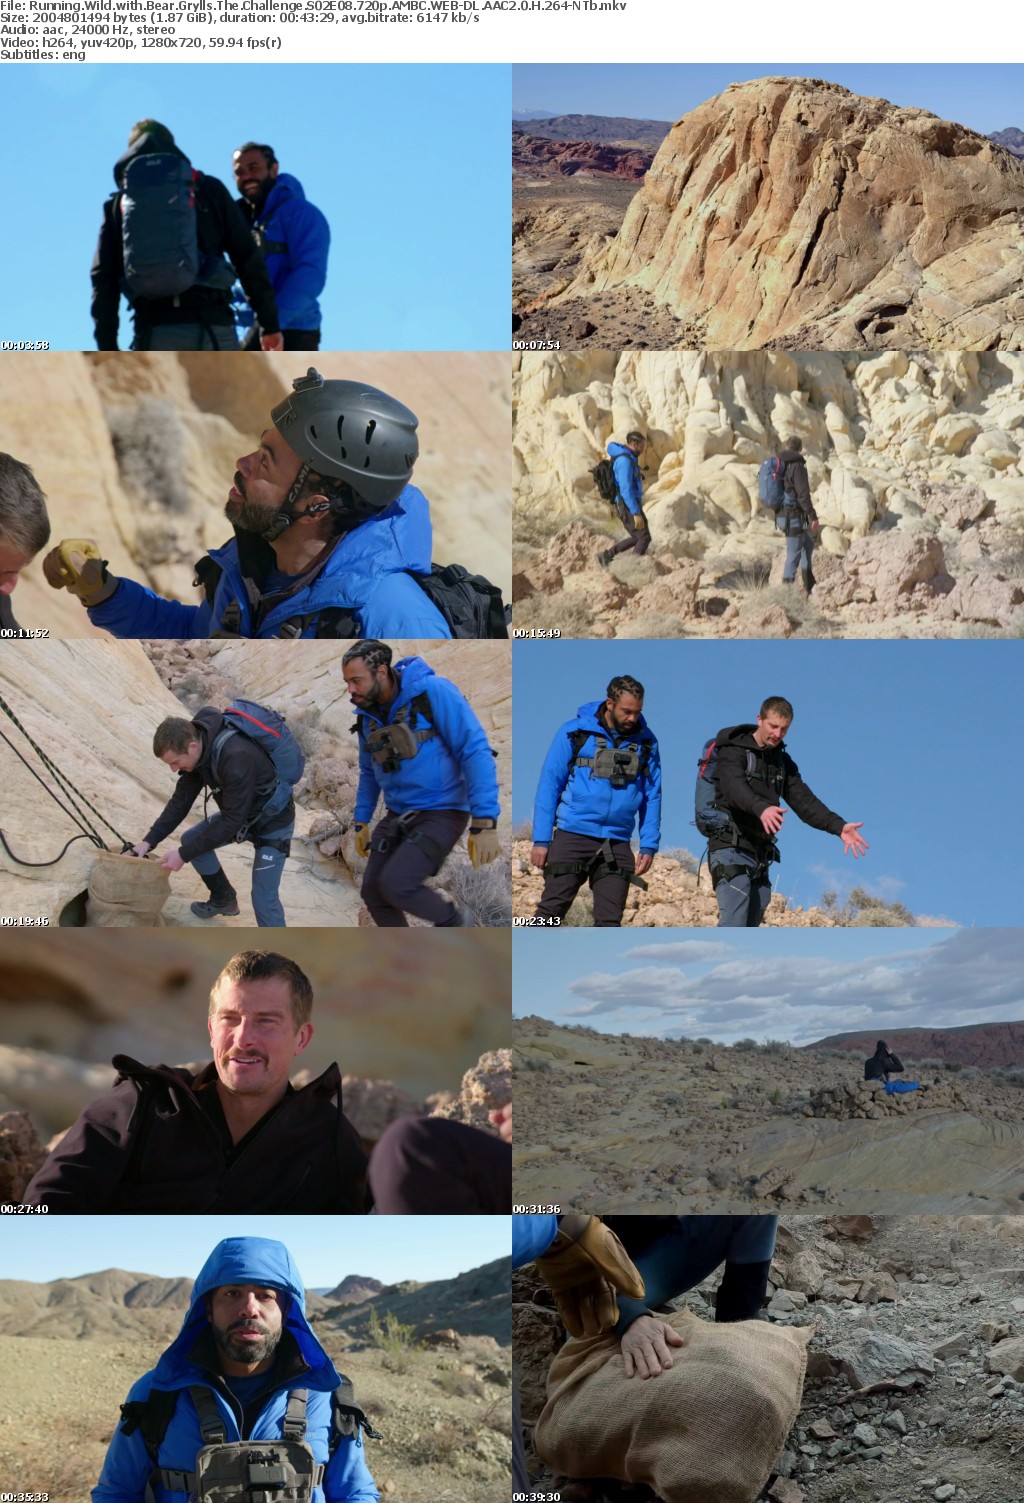 Running Wild with Bear Grylls The Challenge S02E08 720p AMBC WEB-DL AAC2 0 H 264-NTb